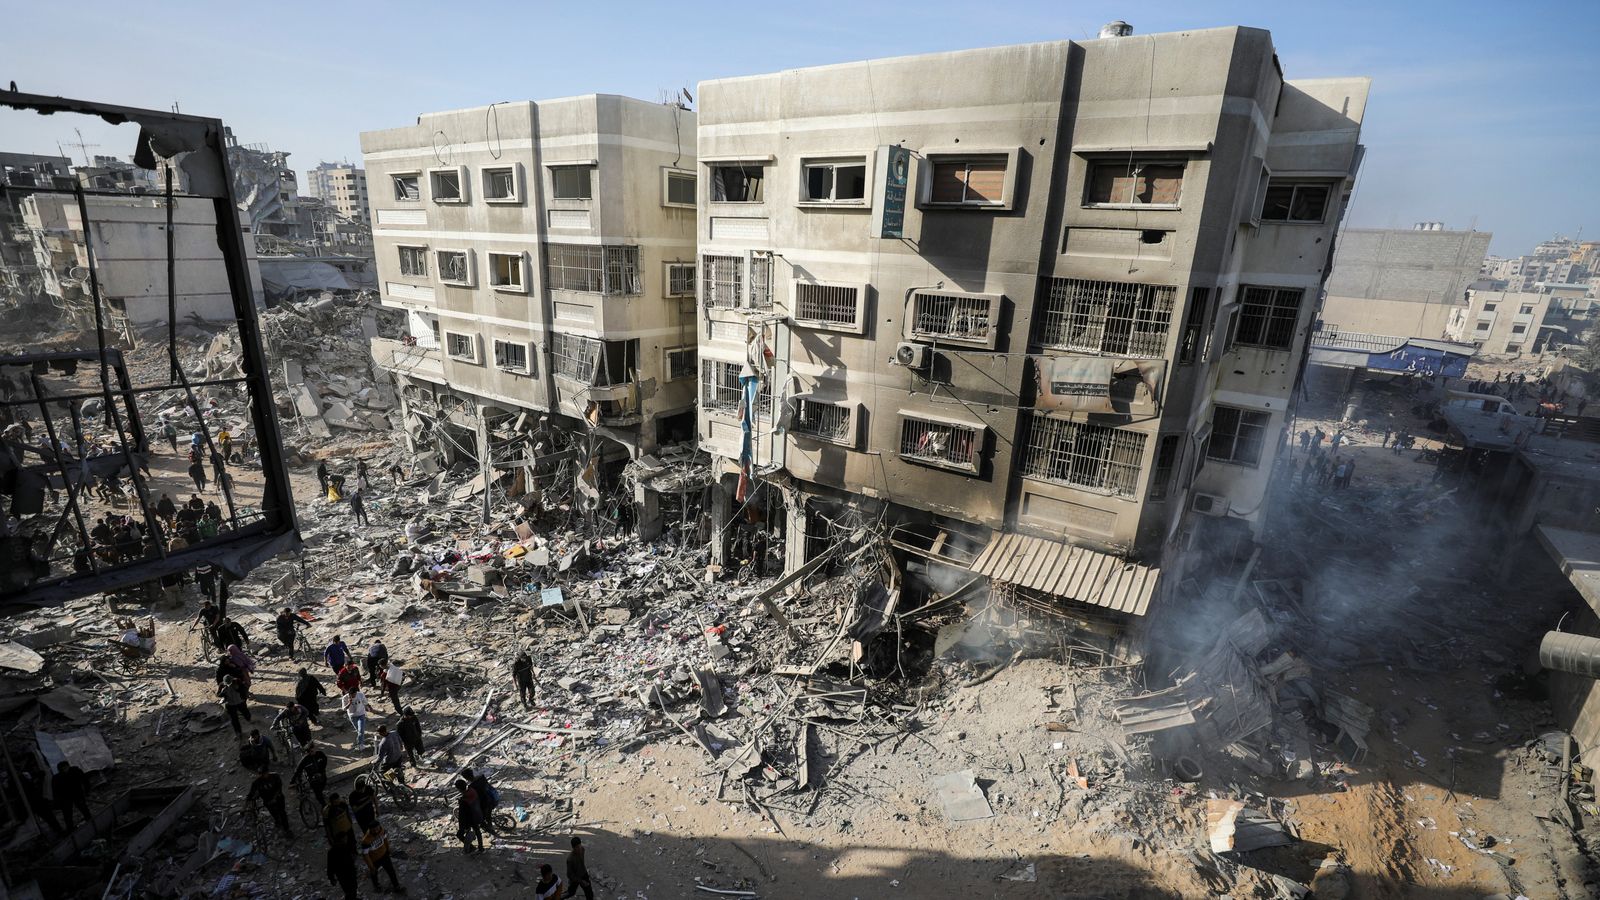 Israeli troops withdraw from Gaza's main hospital after two-week raid, leaving destruction and dead bodies